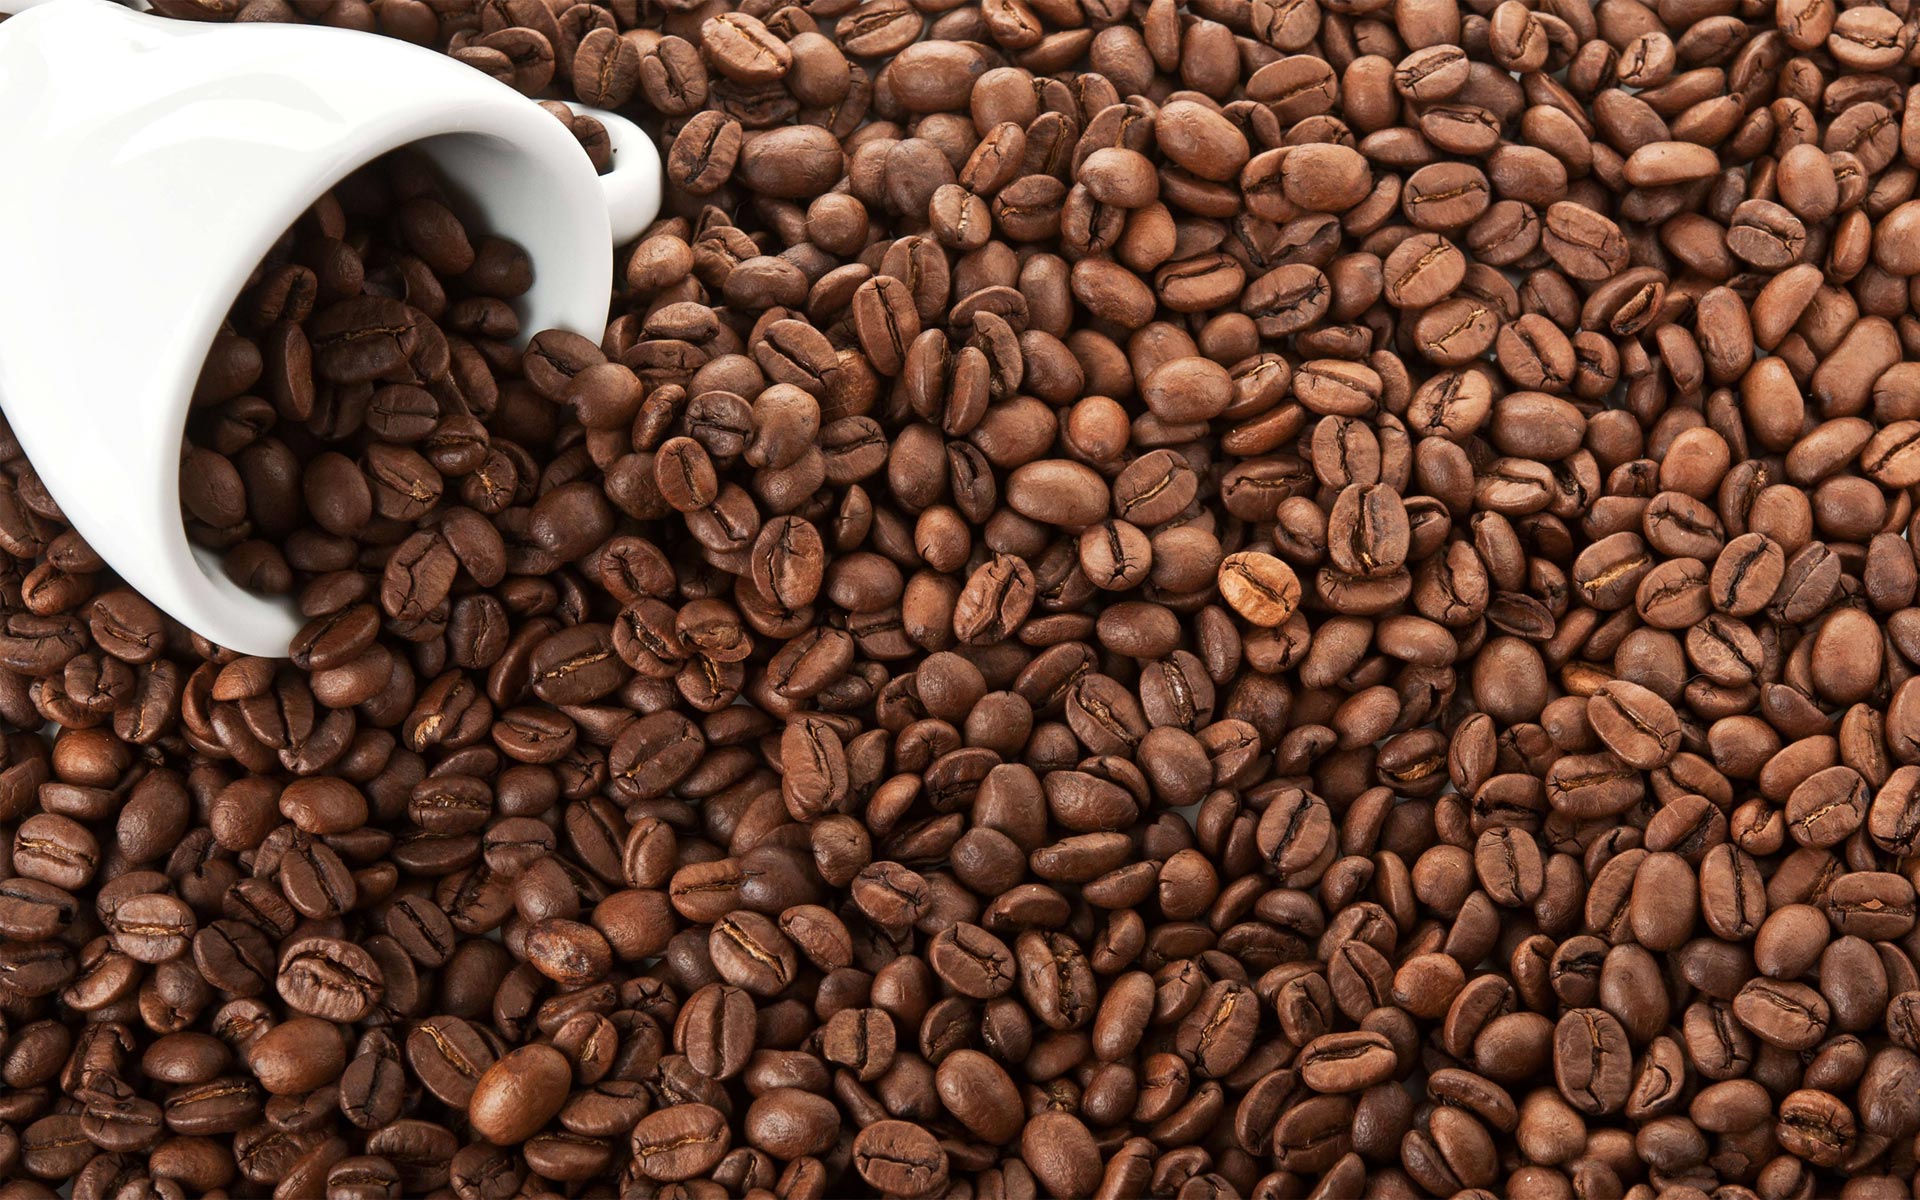 Coffee Hd Wallpapers Free Coffee Cup Hd Wallpapers Coffee Beans